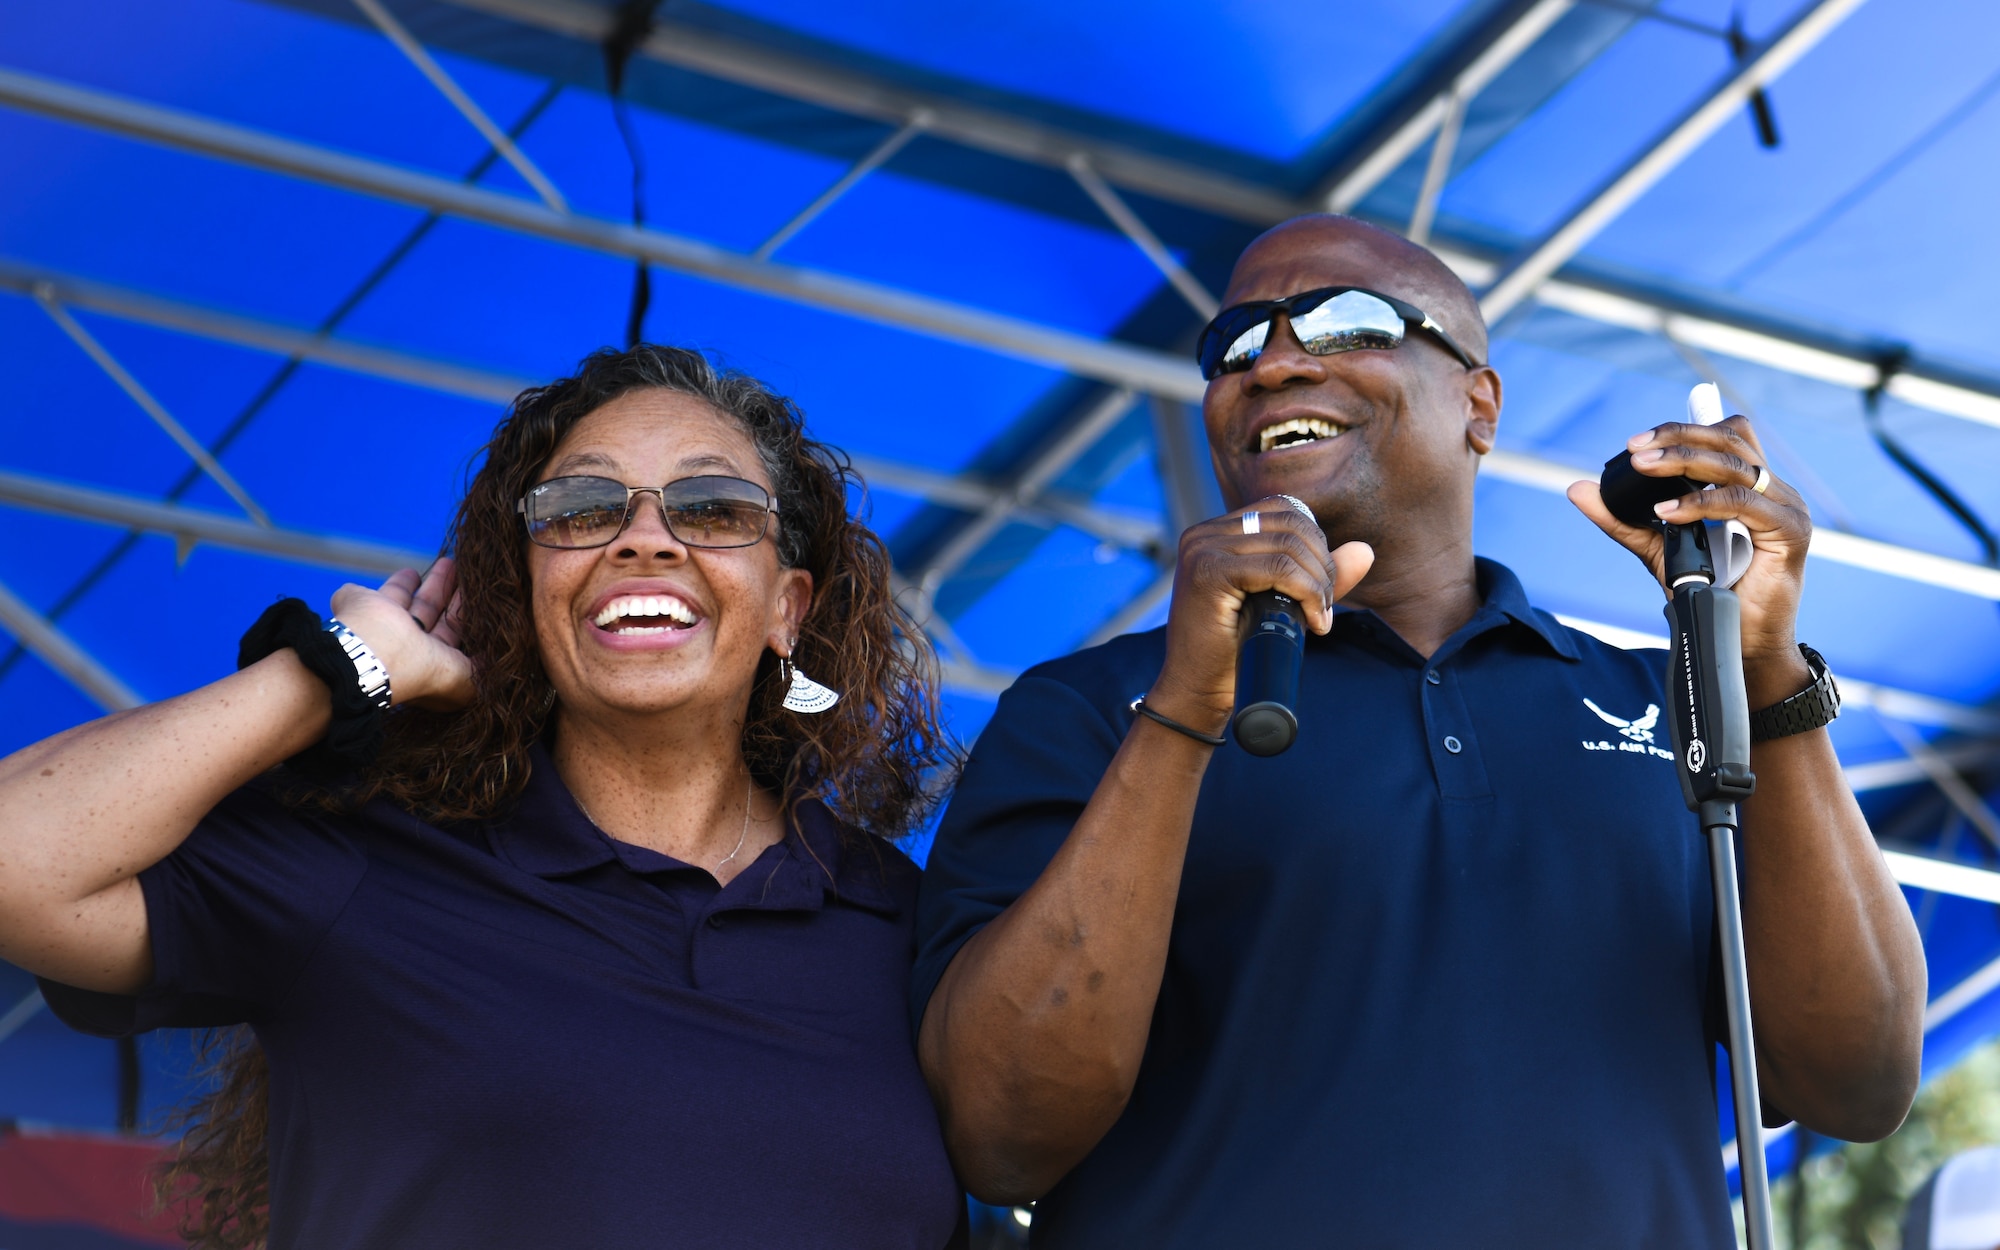 Col. Devin Pepper, 460th Space Wing commander, and his wife, Alicia, host Fun Fest, July 25, 2019 on Buckley Air Force Base, Colo. Fun Fest is an annual event held at Buckley AFB that highlights spending time with family and friends with free events and entertainment. (U.S. Air Force photo by Airman 1st Class Michael D. Mathews)